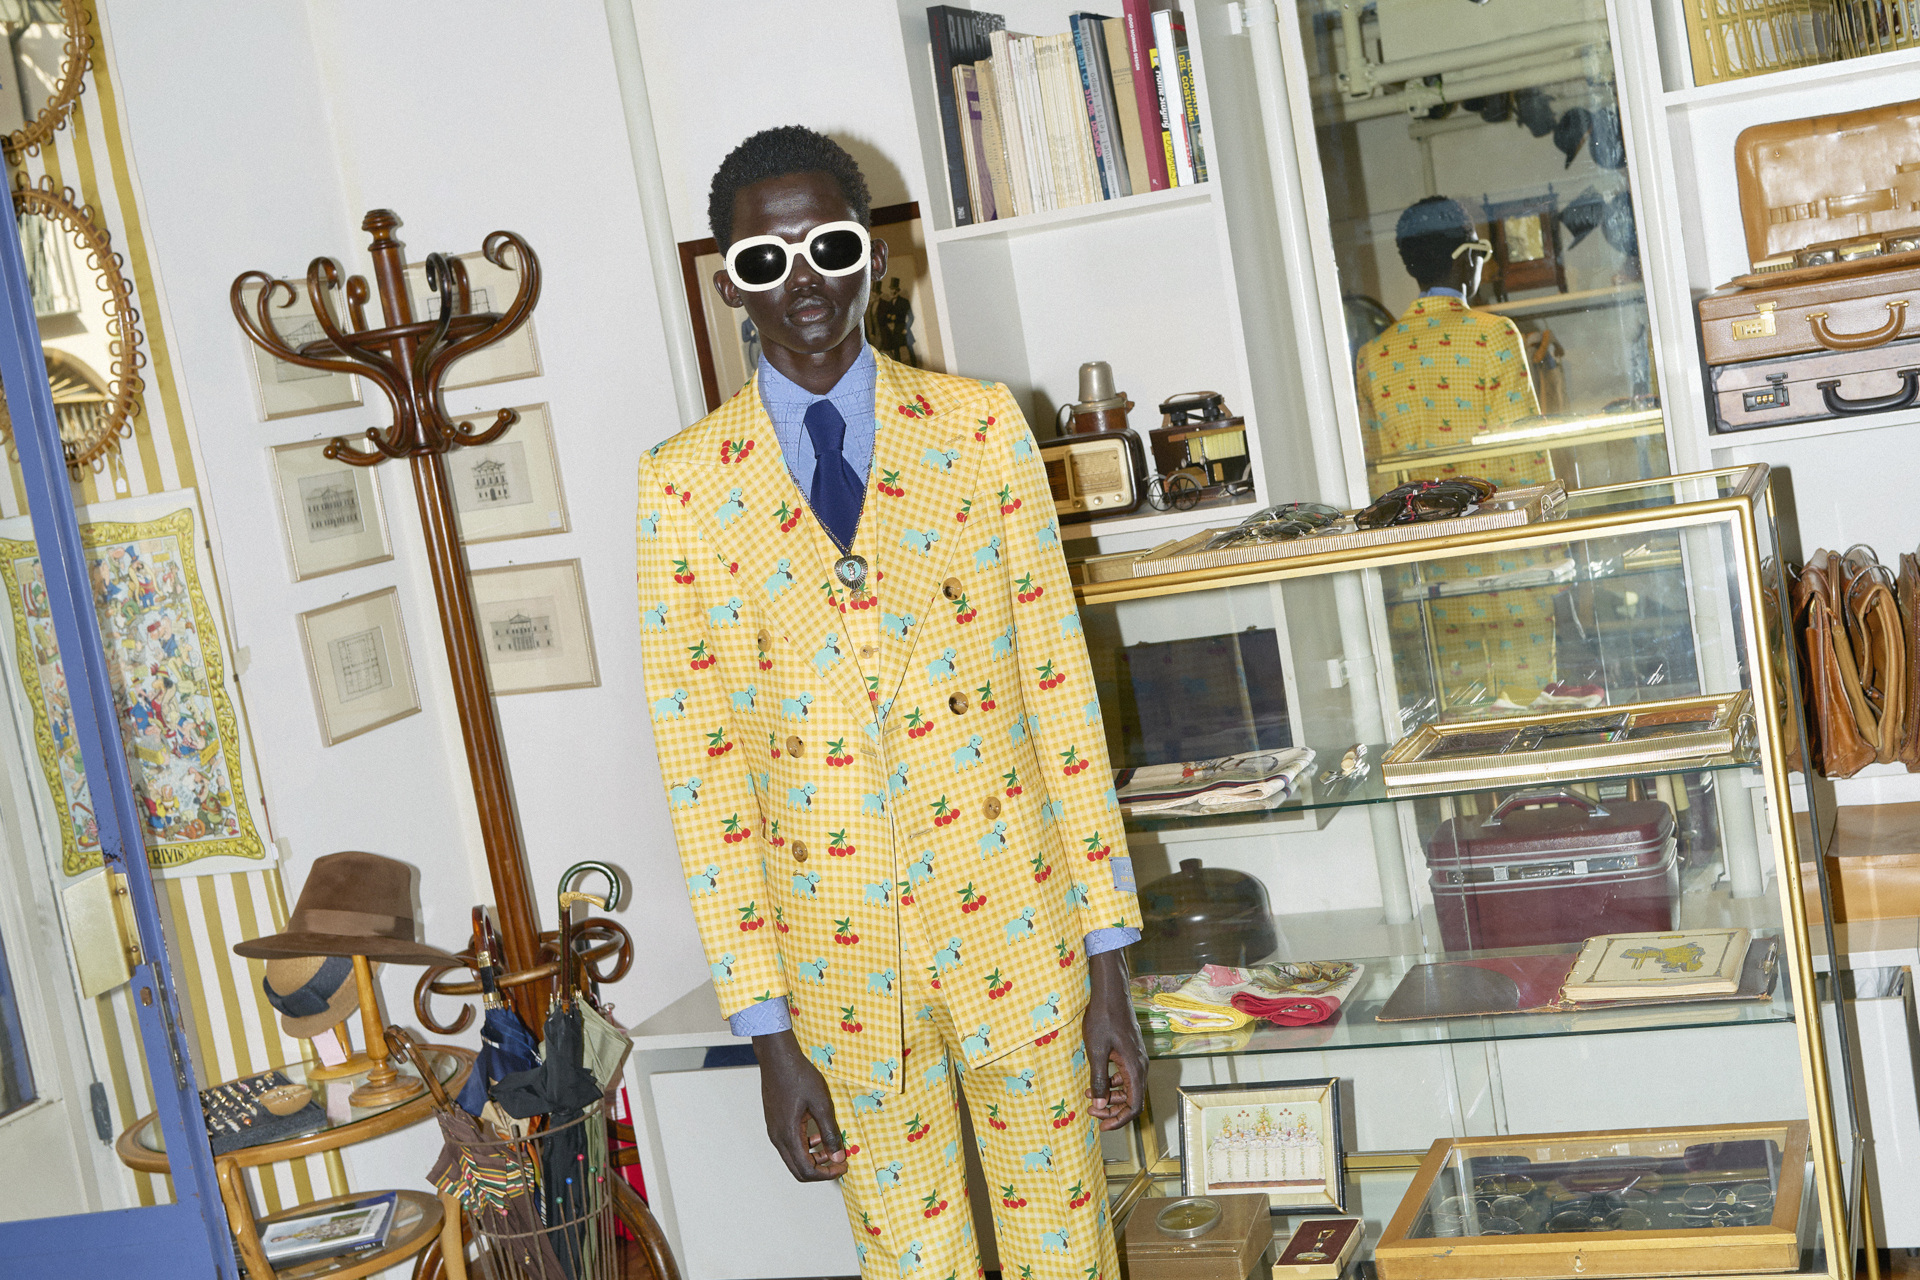 Black male model stood in antiques and curios shop, wearing a yellow printed suit and large black sunglasses with white frames